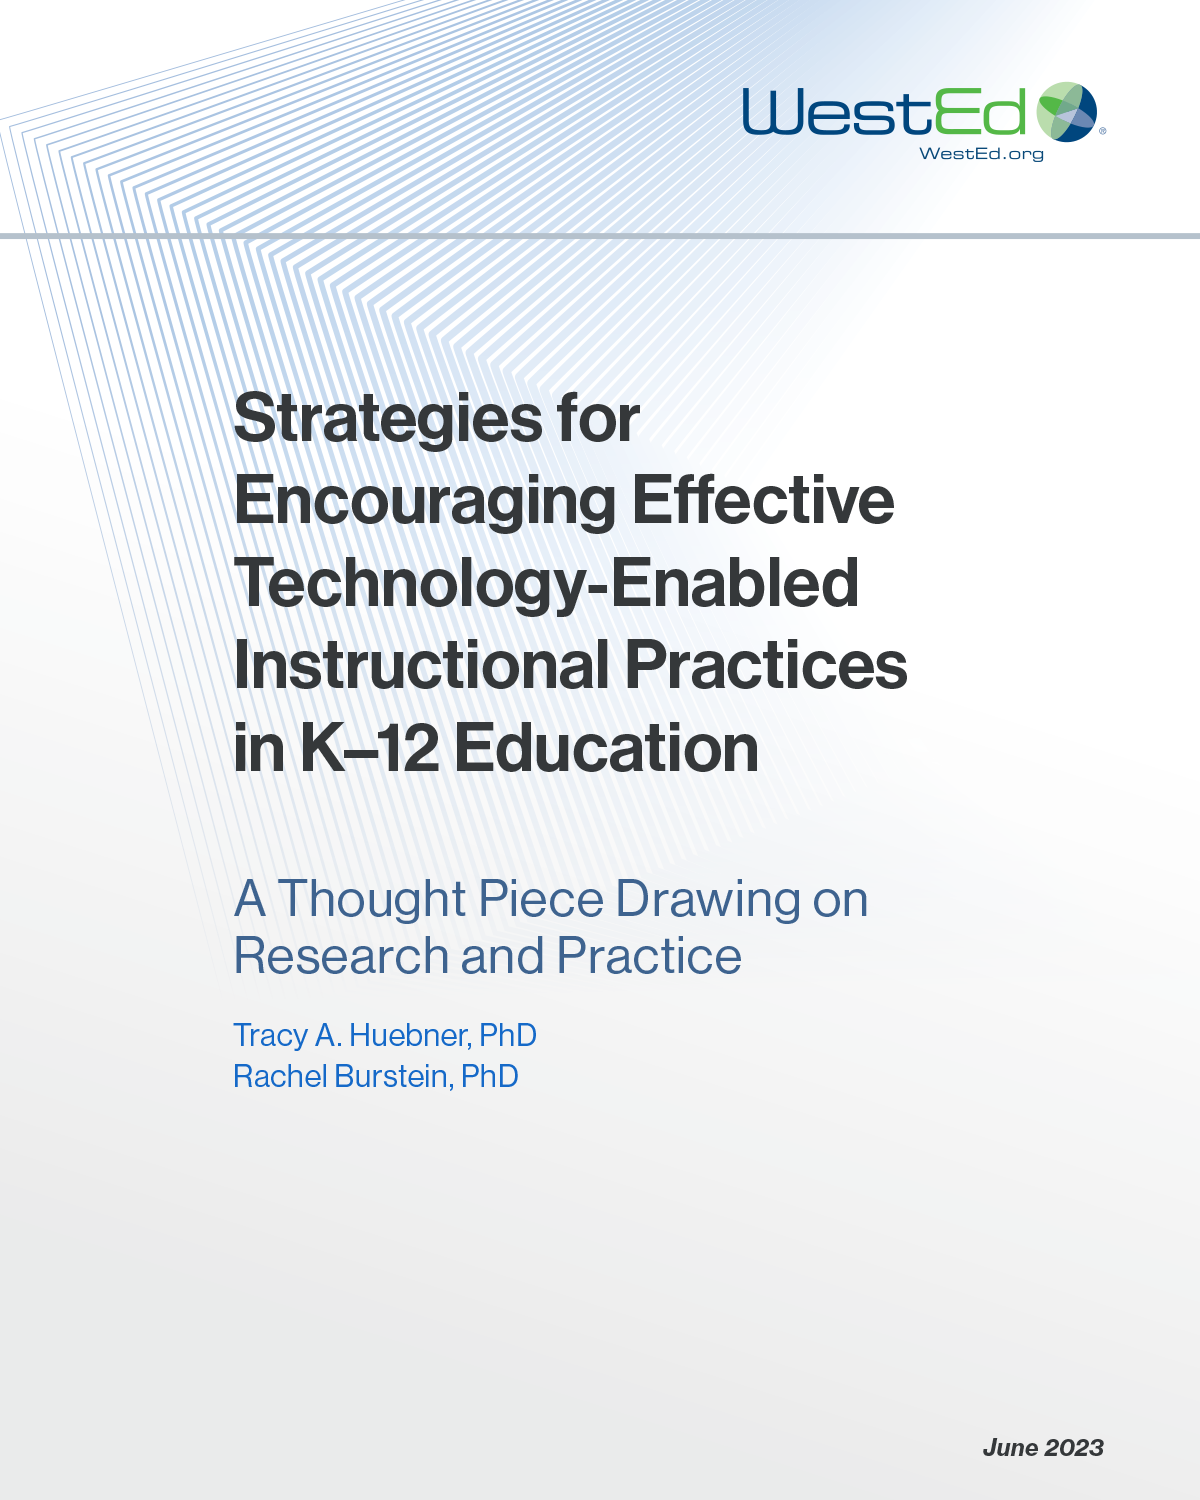 Strategies for Encouraging Effective Technology-Enabled Instructional Practices in K-12 Education